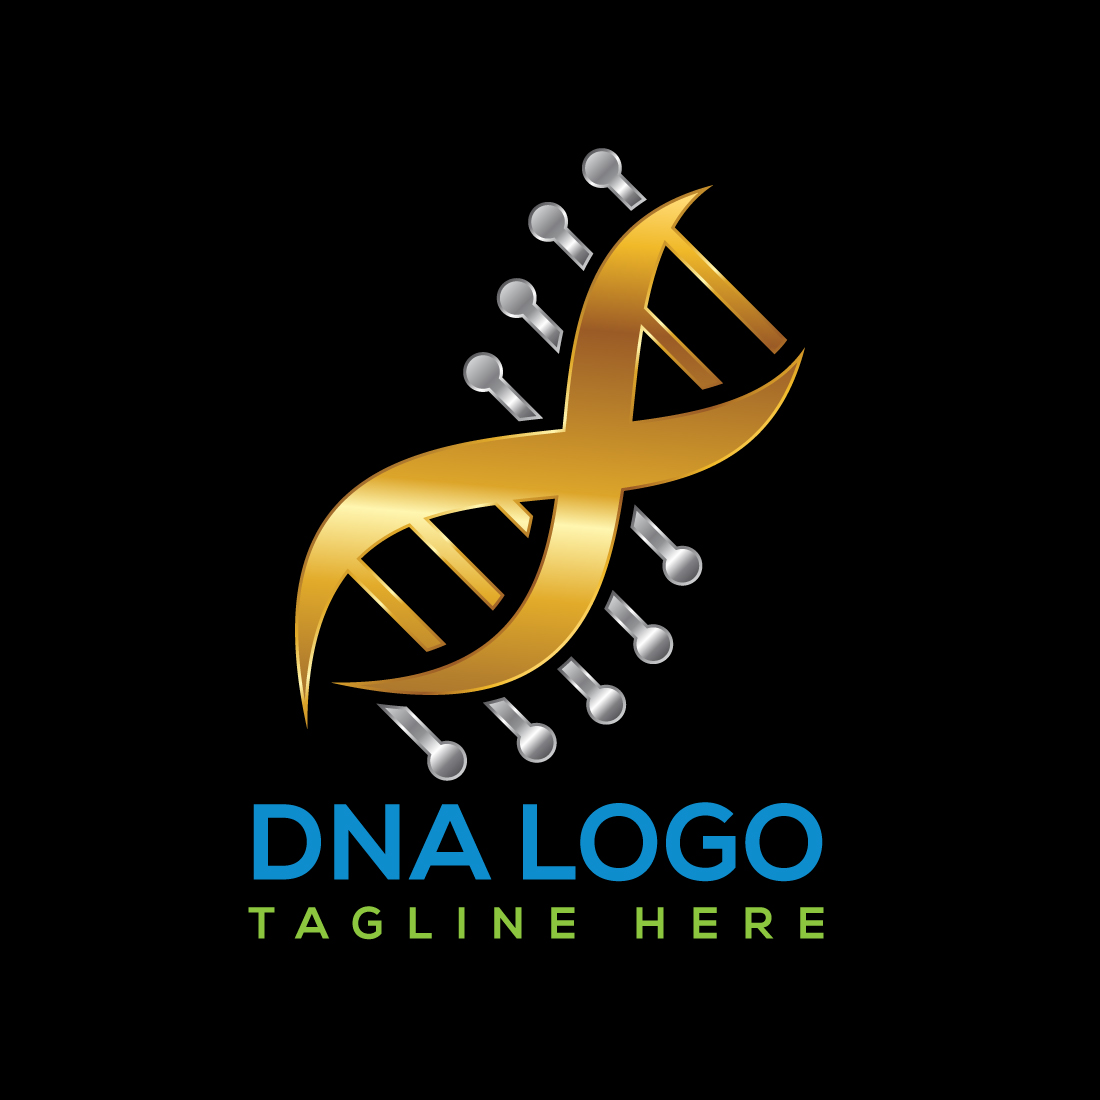 An image of an enchanting logo in the form of DNA on a black background.